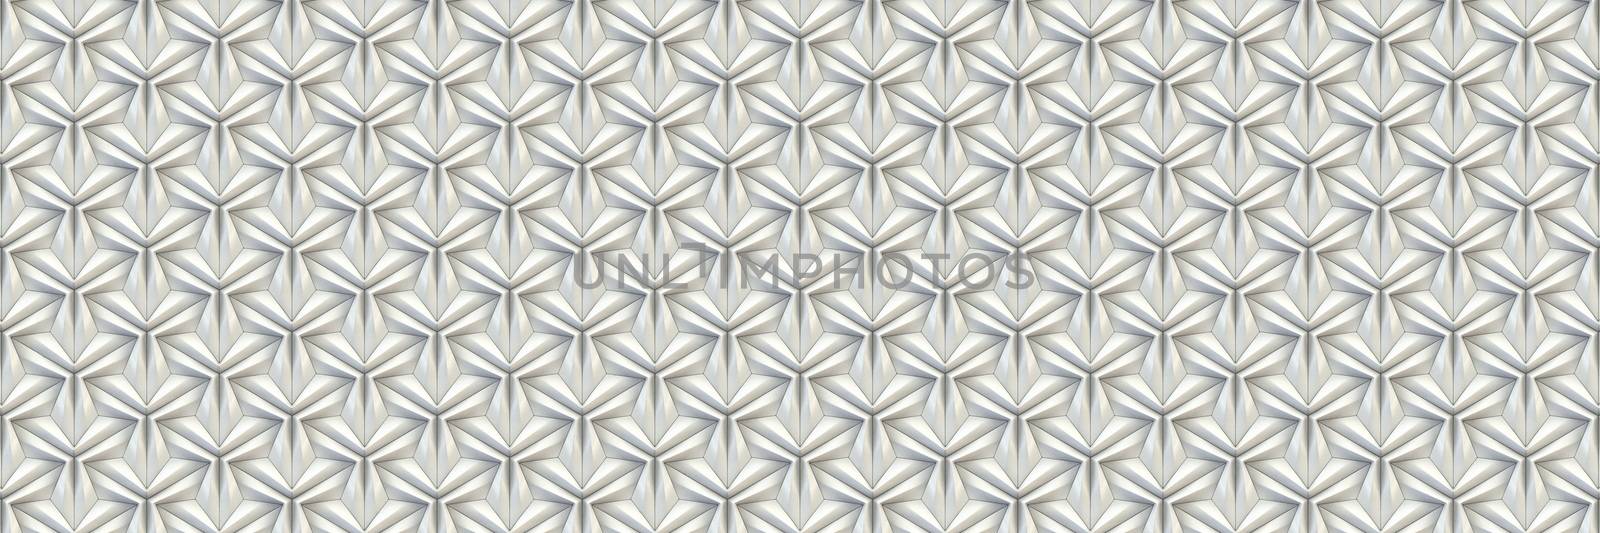 Abstract wall tiles texture background Textile 3D by djmilic